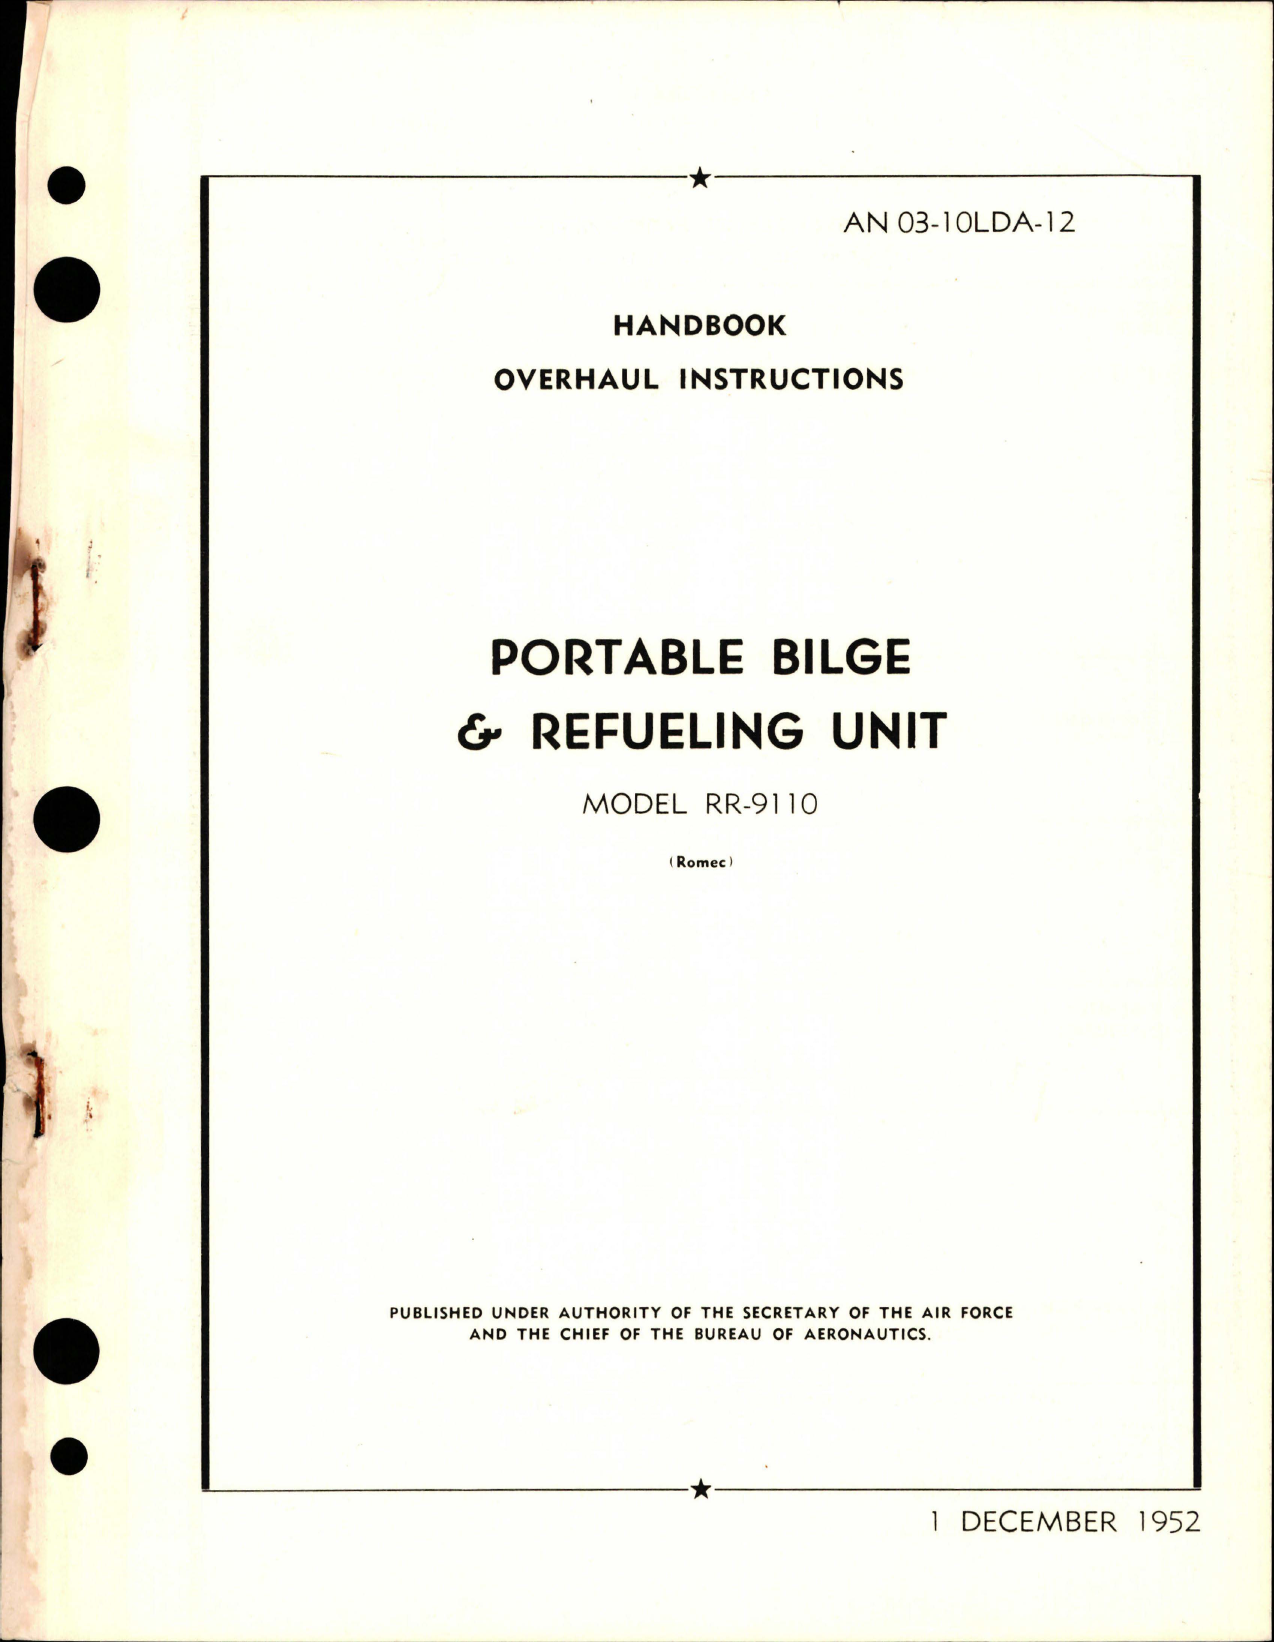 Sample page 1 from AirCorps Library document: Overhaul Instructions for Portable Bilge & Refueling Unit - Models RR-9110